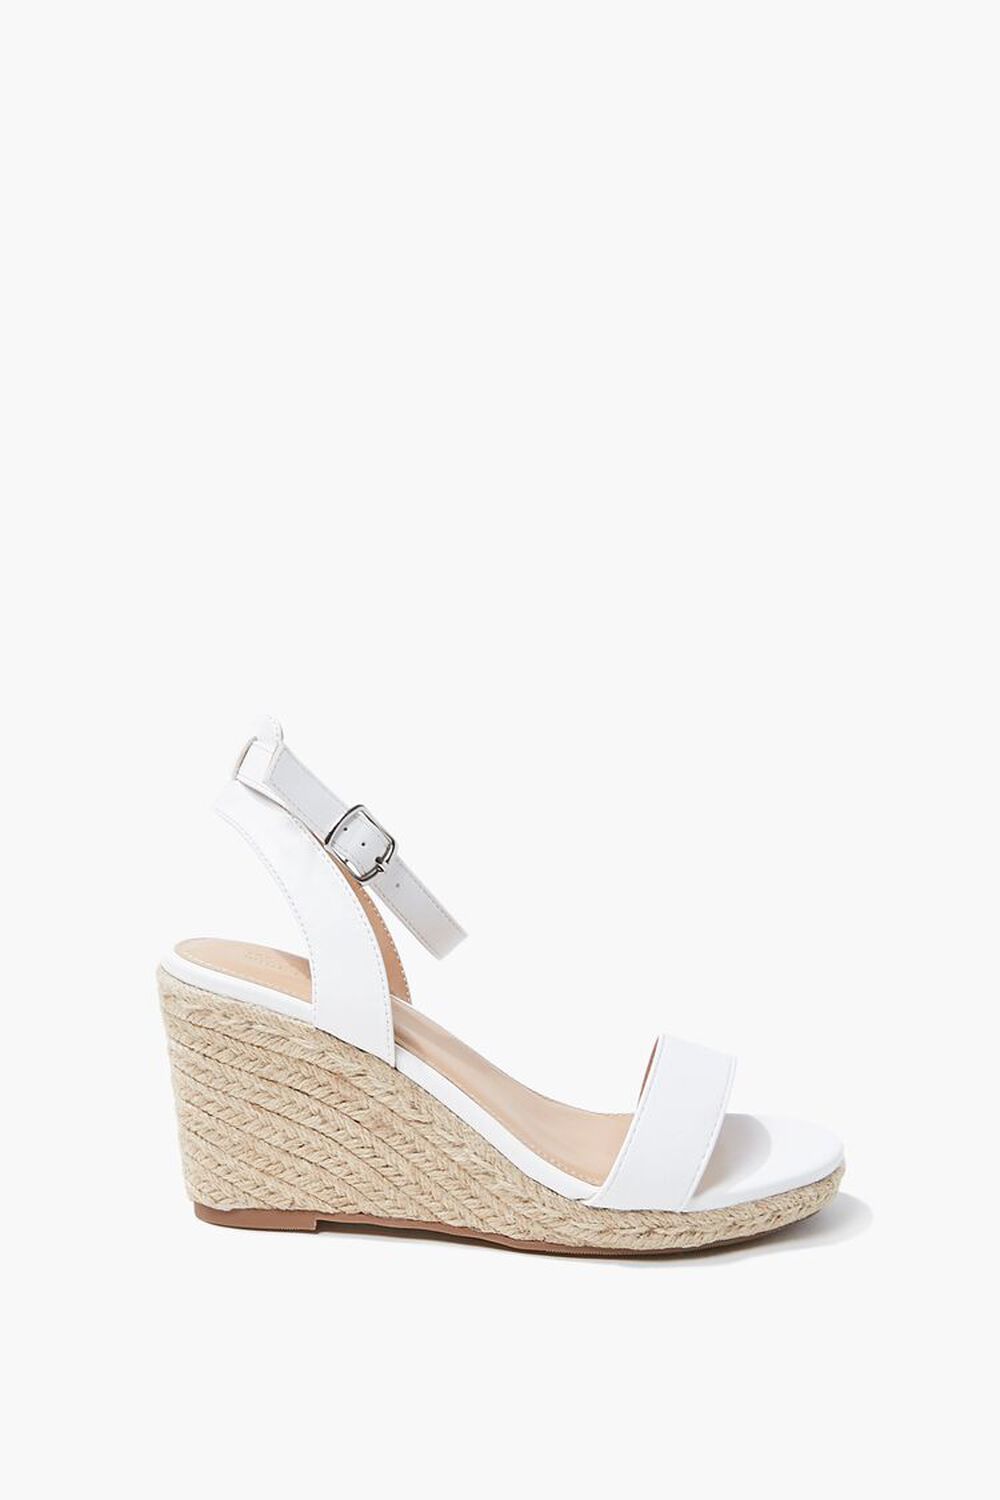 WHITE Single-Strap Espadrille Wedges (Wide), image 2